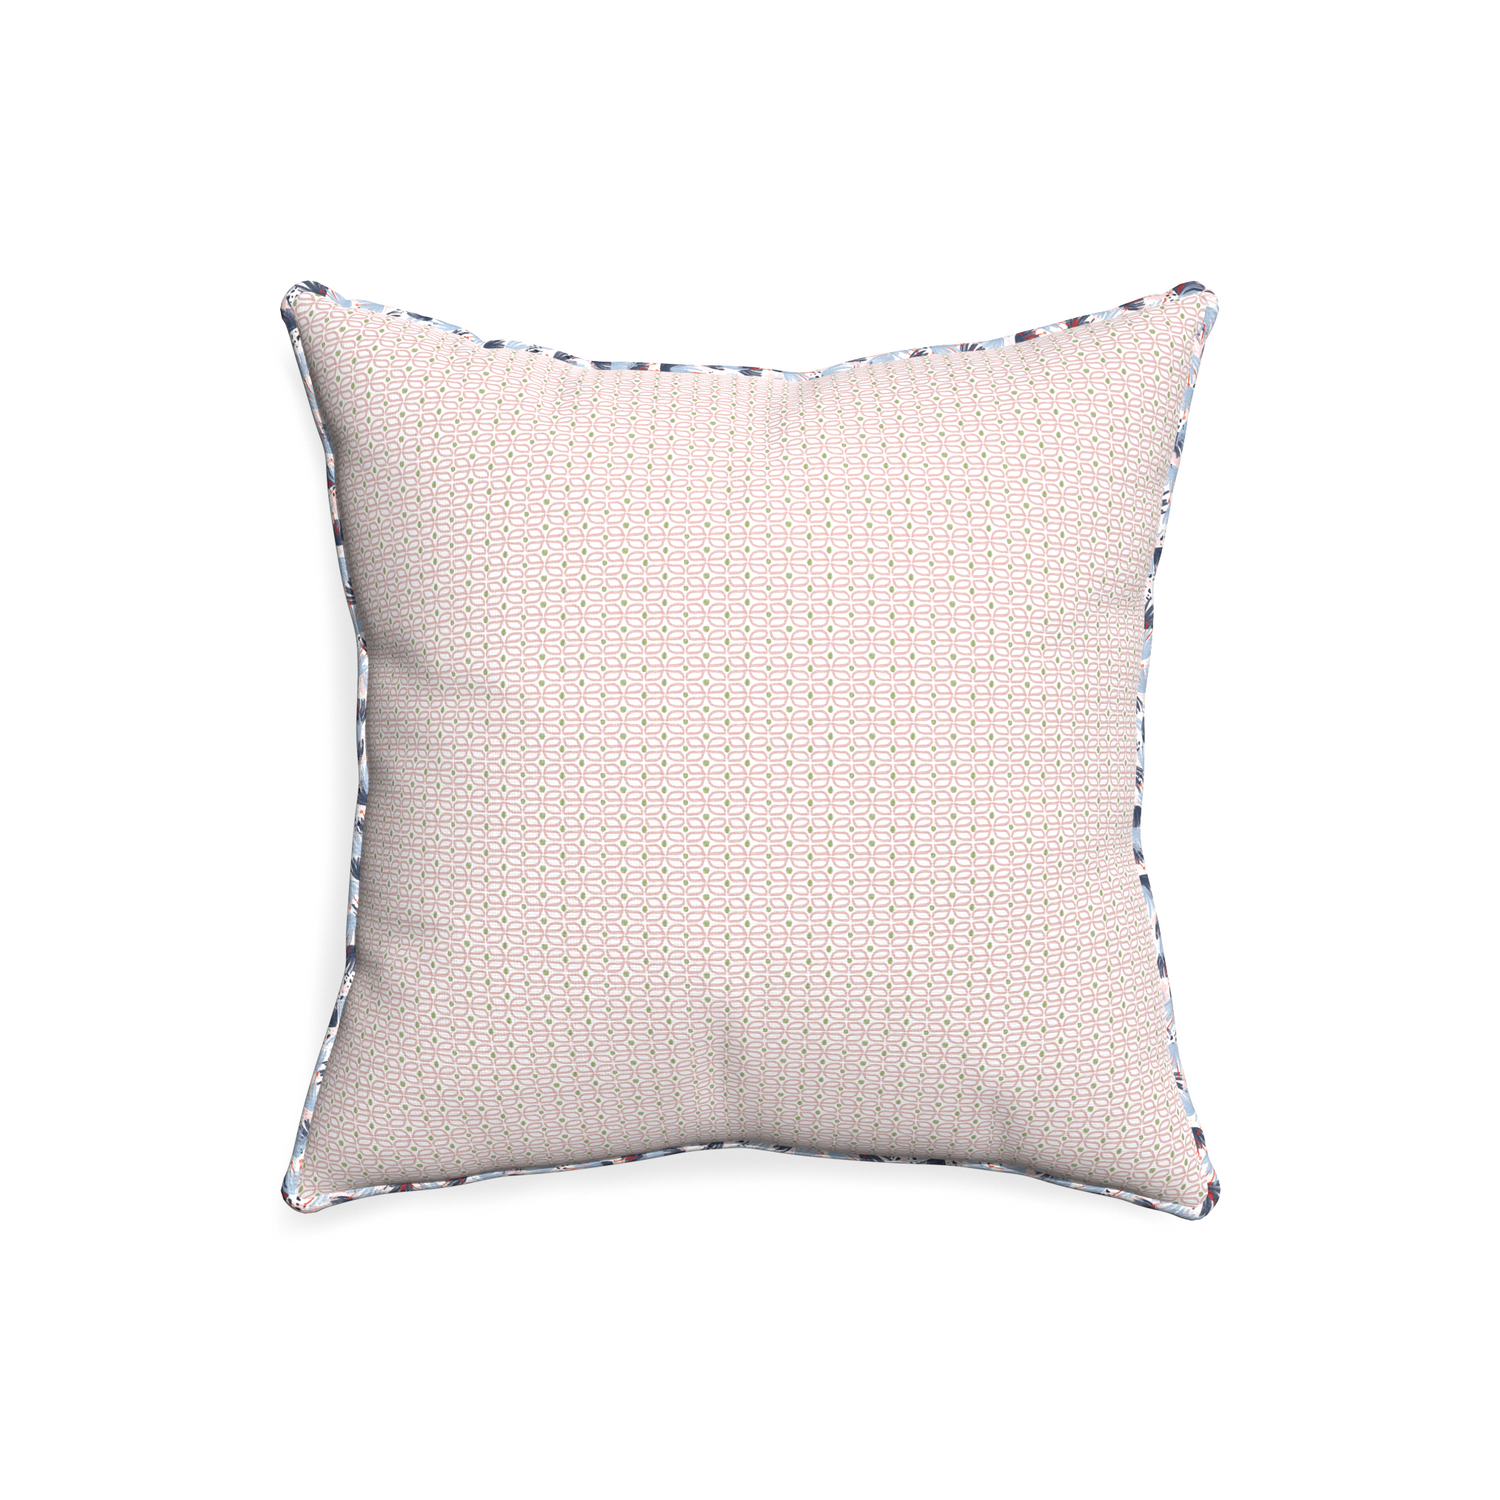 20-square loomi pink custom pillow with e piping on white background